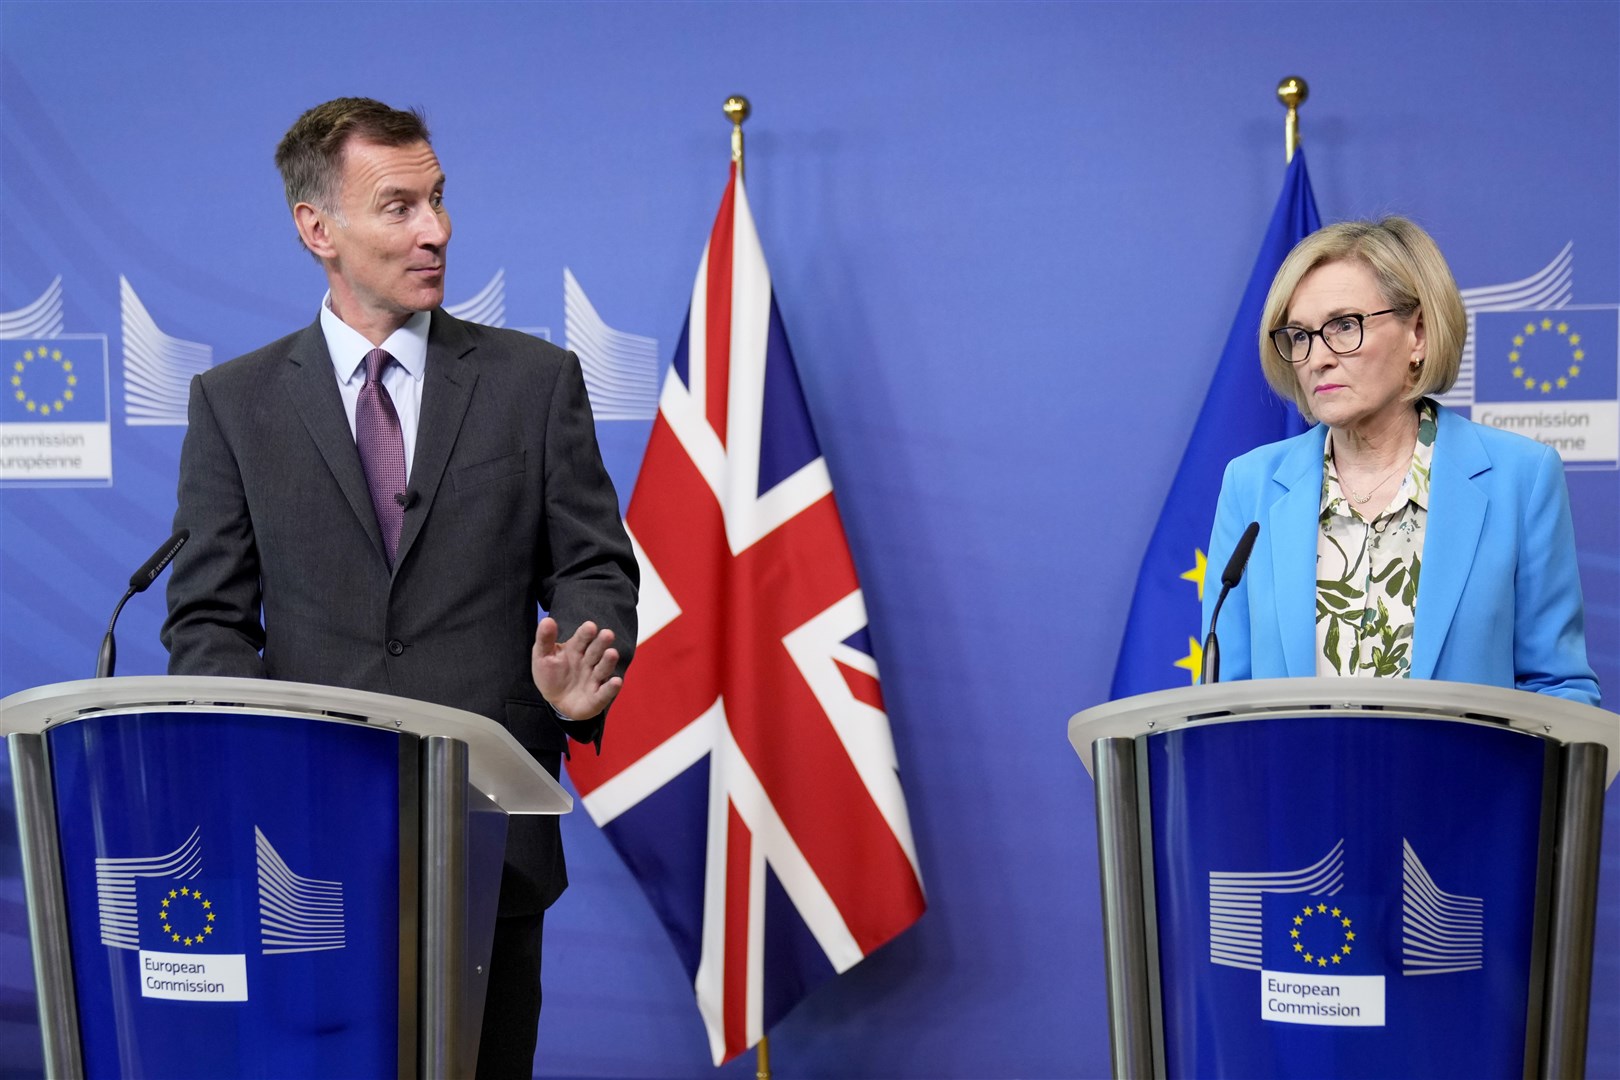 Jeremy Hunt and Mairead McGuinness were questioned about the Horizon scheme during a joint appearance in Brussels (Virginia Mayo/AP)